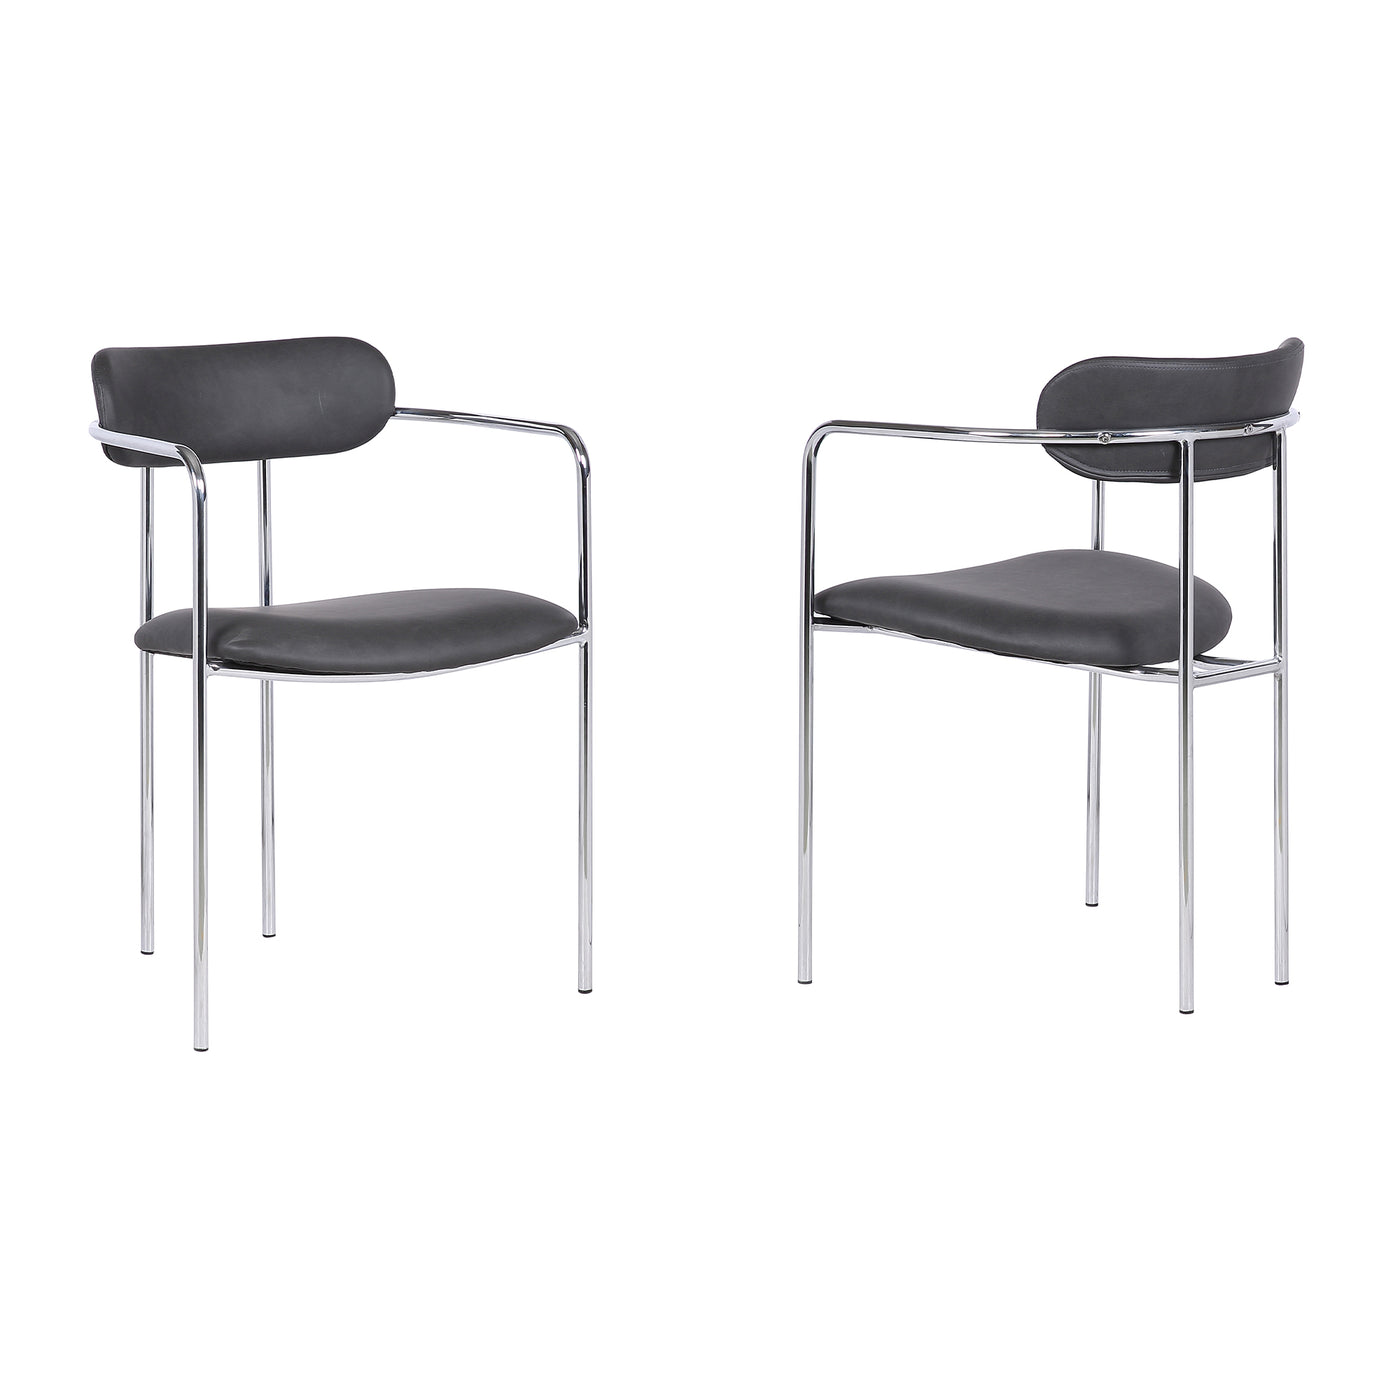 Gwen Dining Chair Set of 2